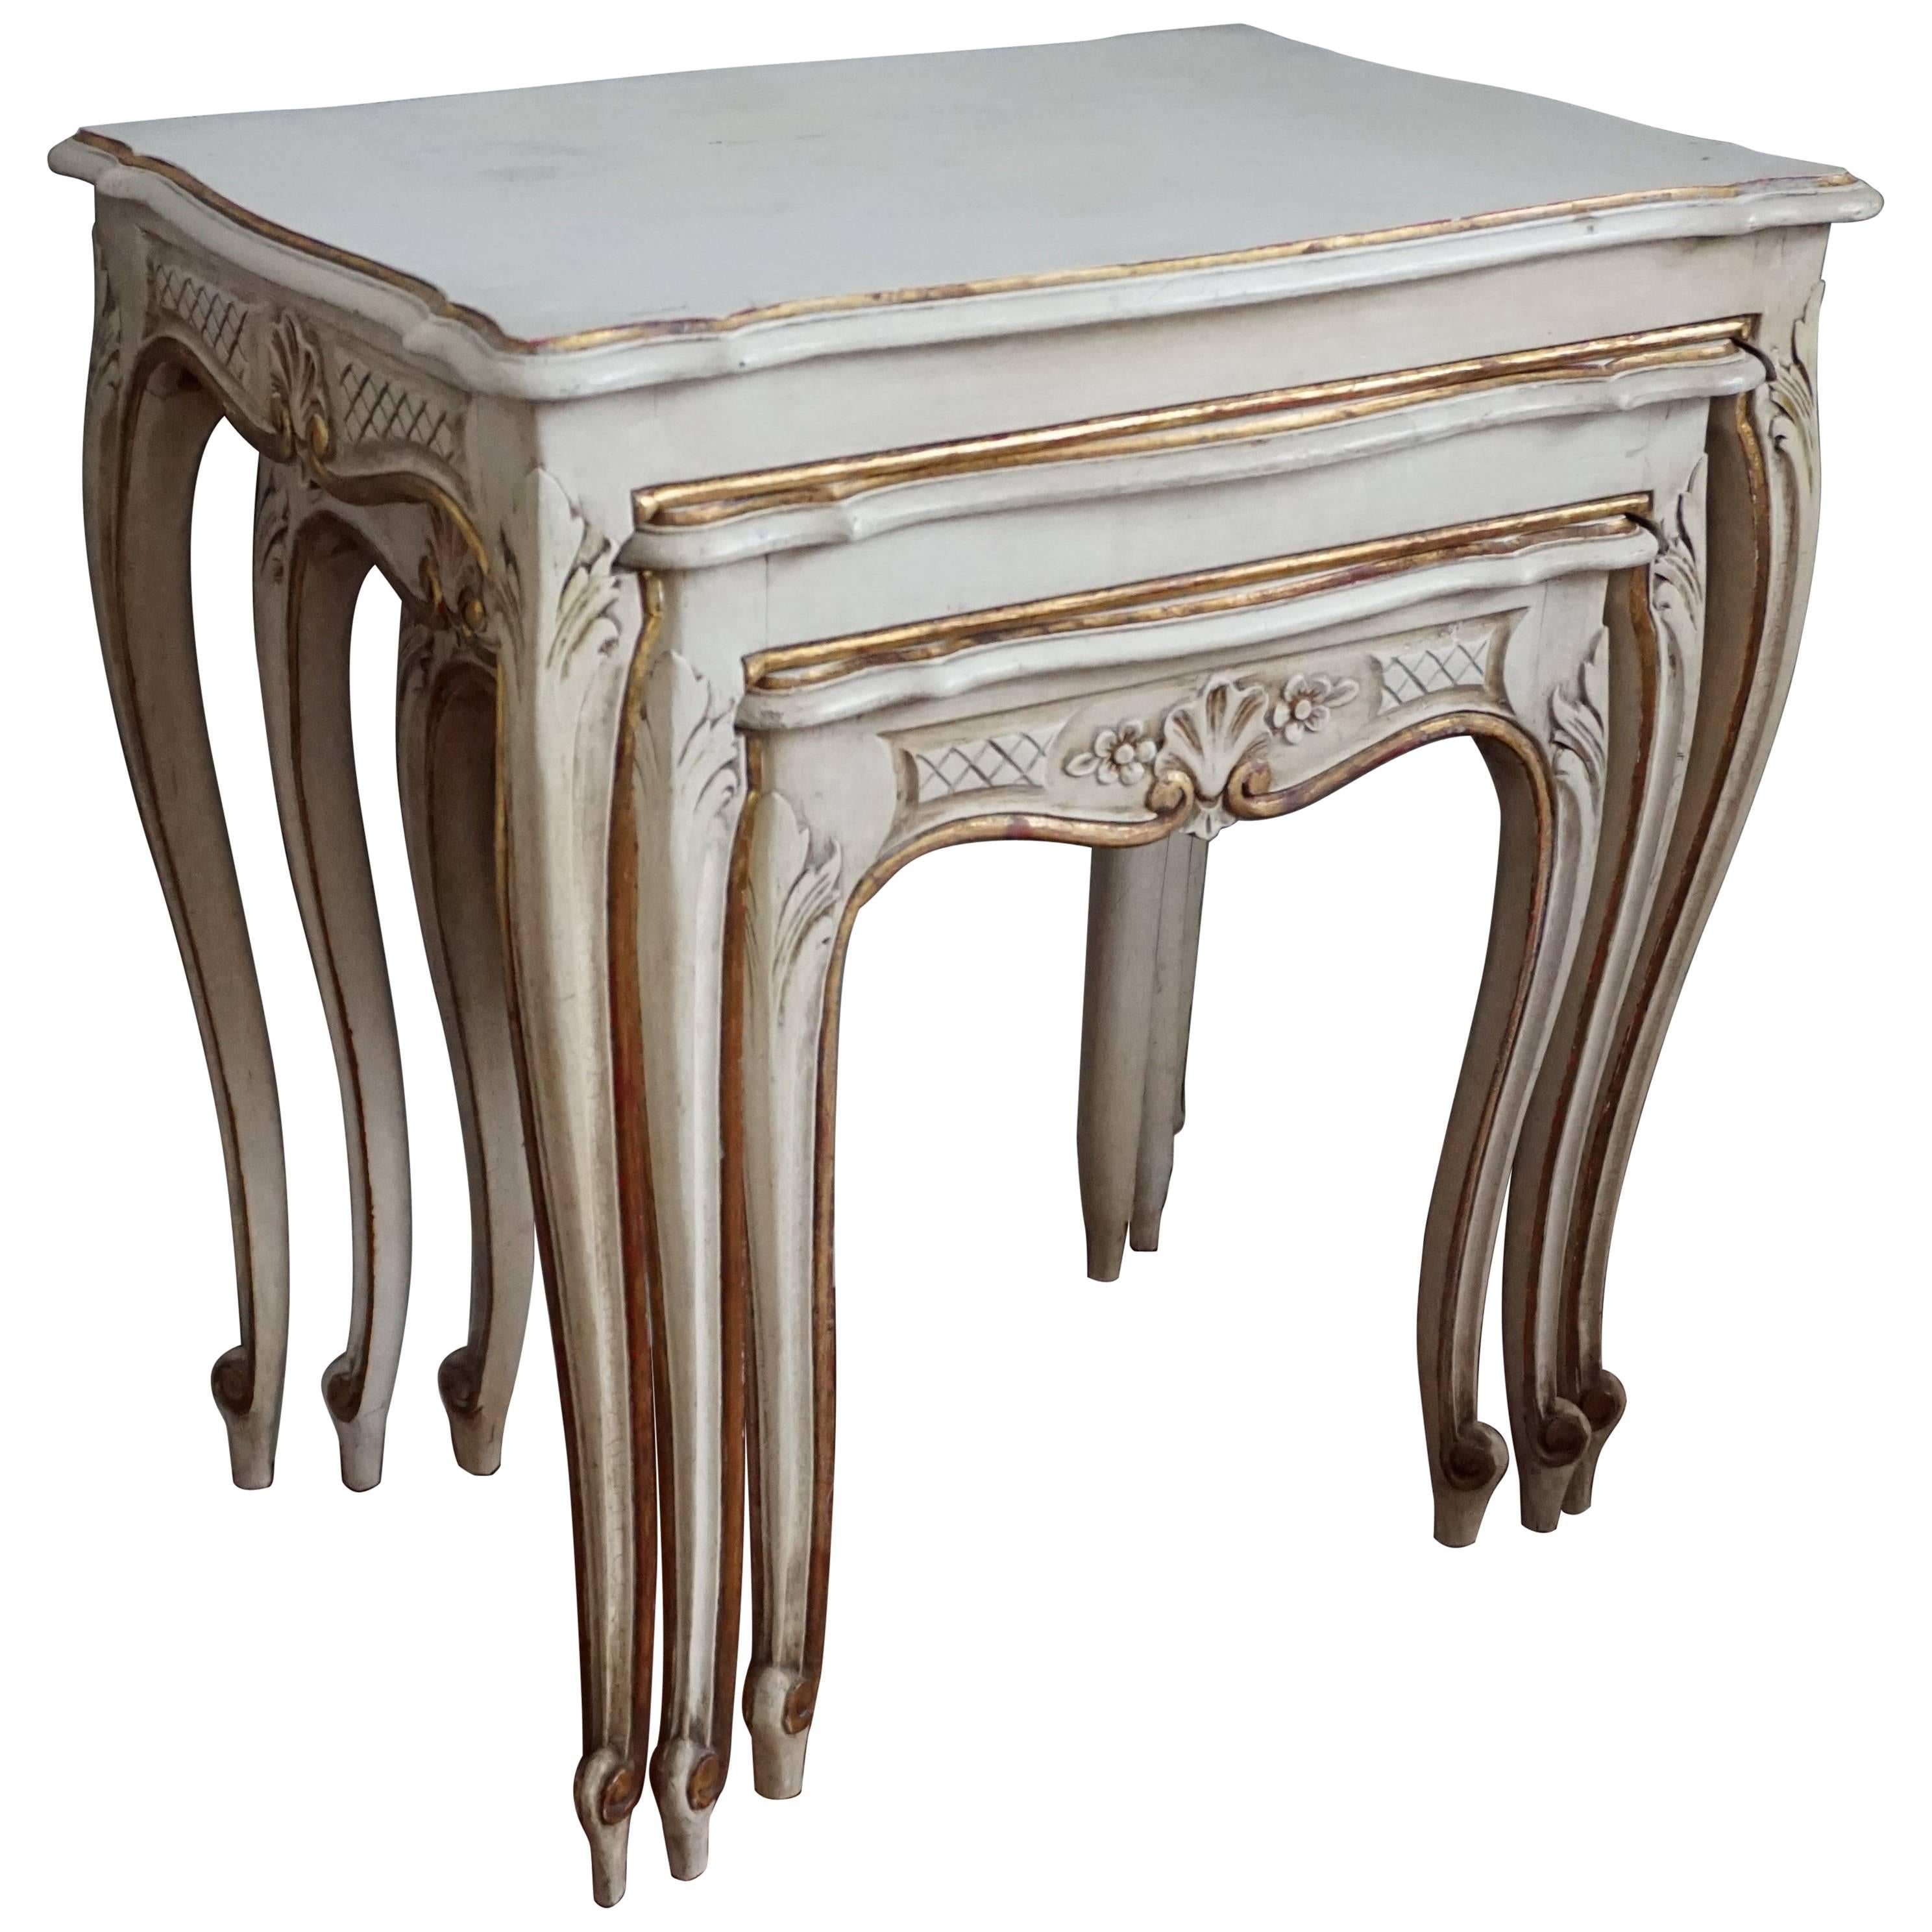 Early 20th Century Italian or French Nest of Tables in Beige-White with Gilding